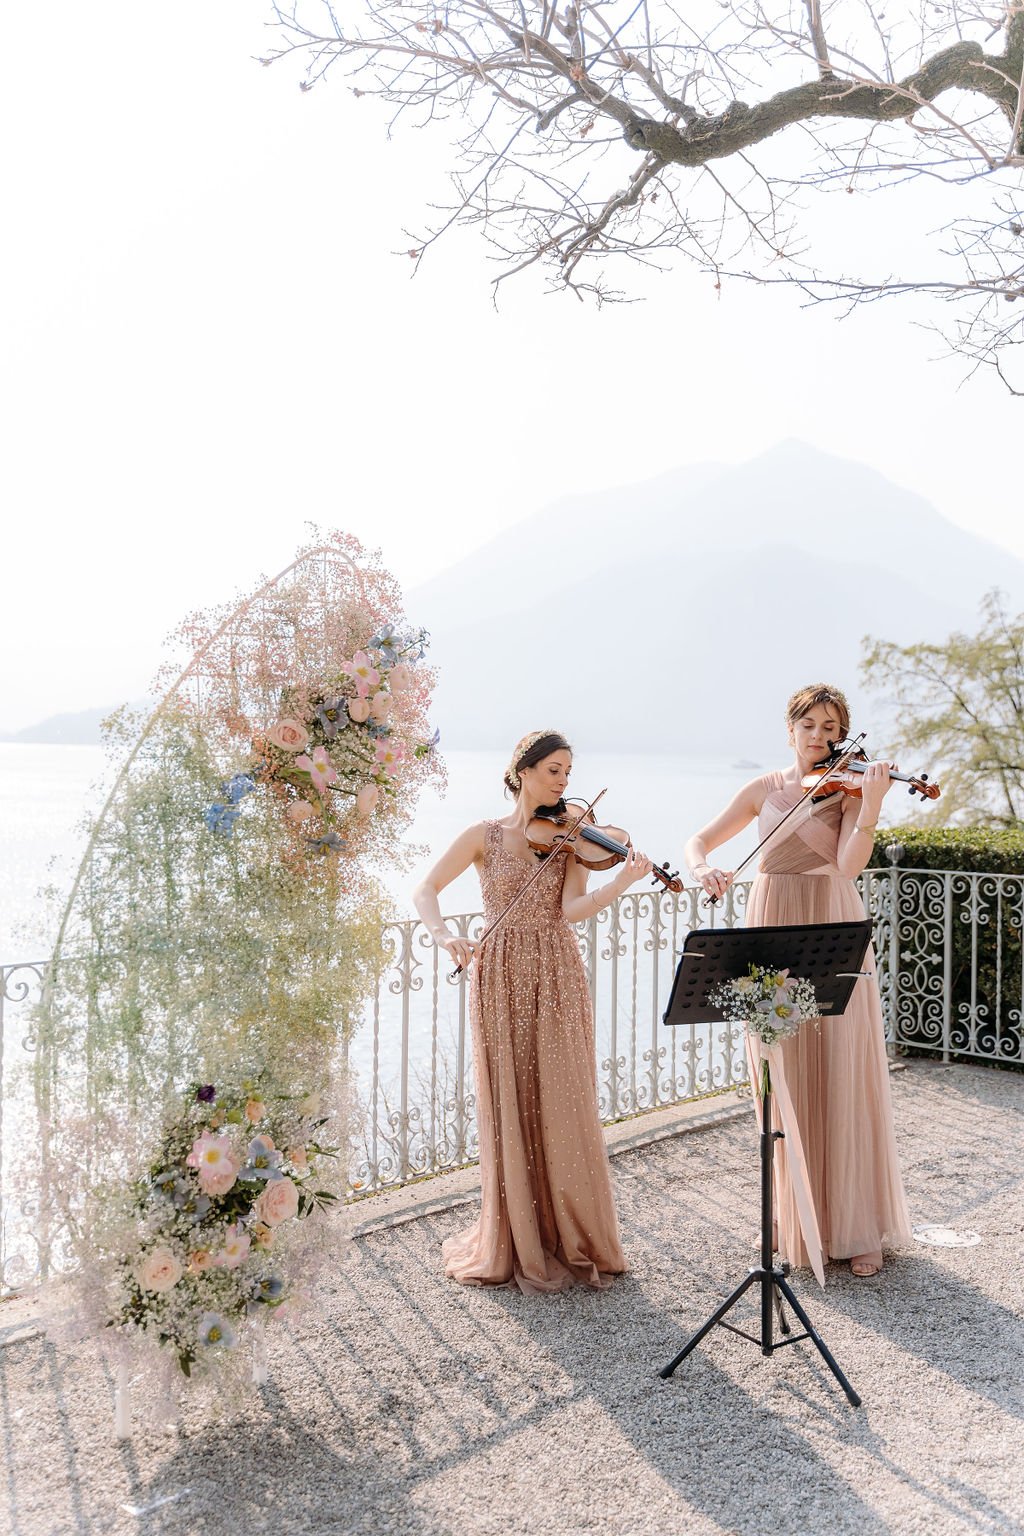 violinists at a wedding